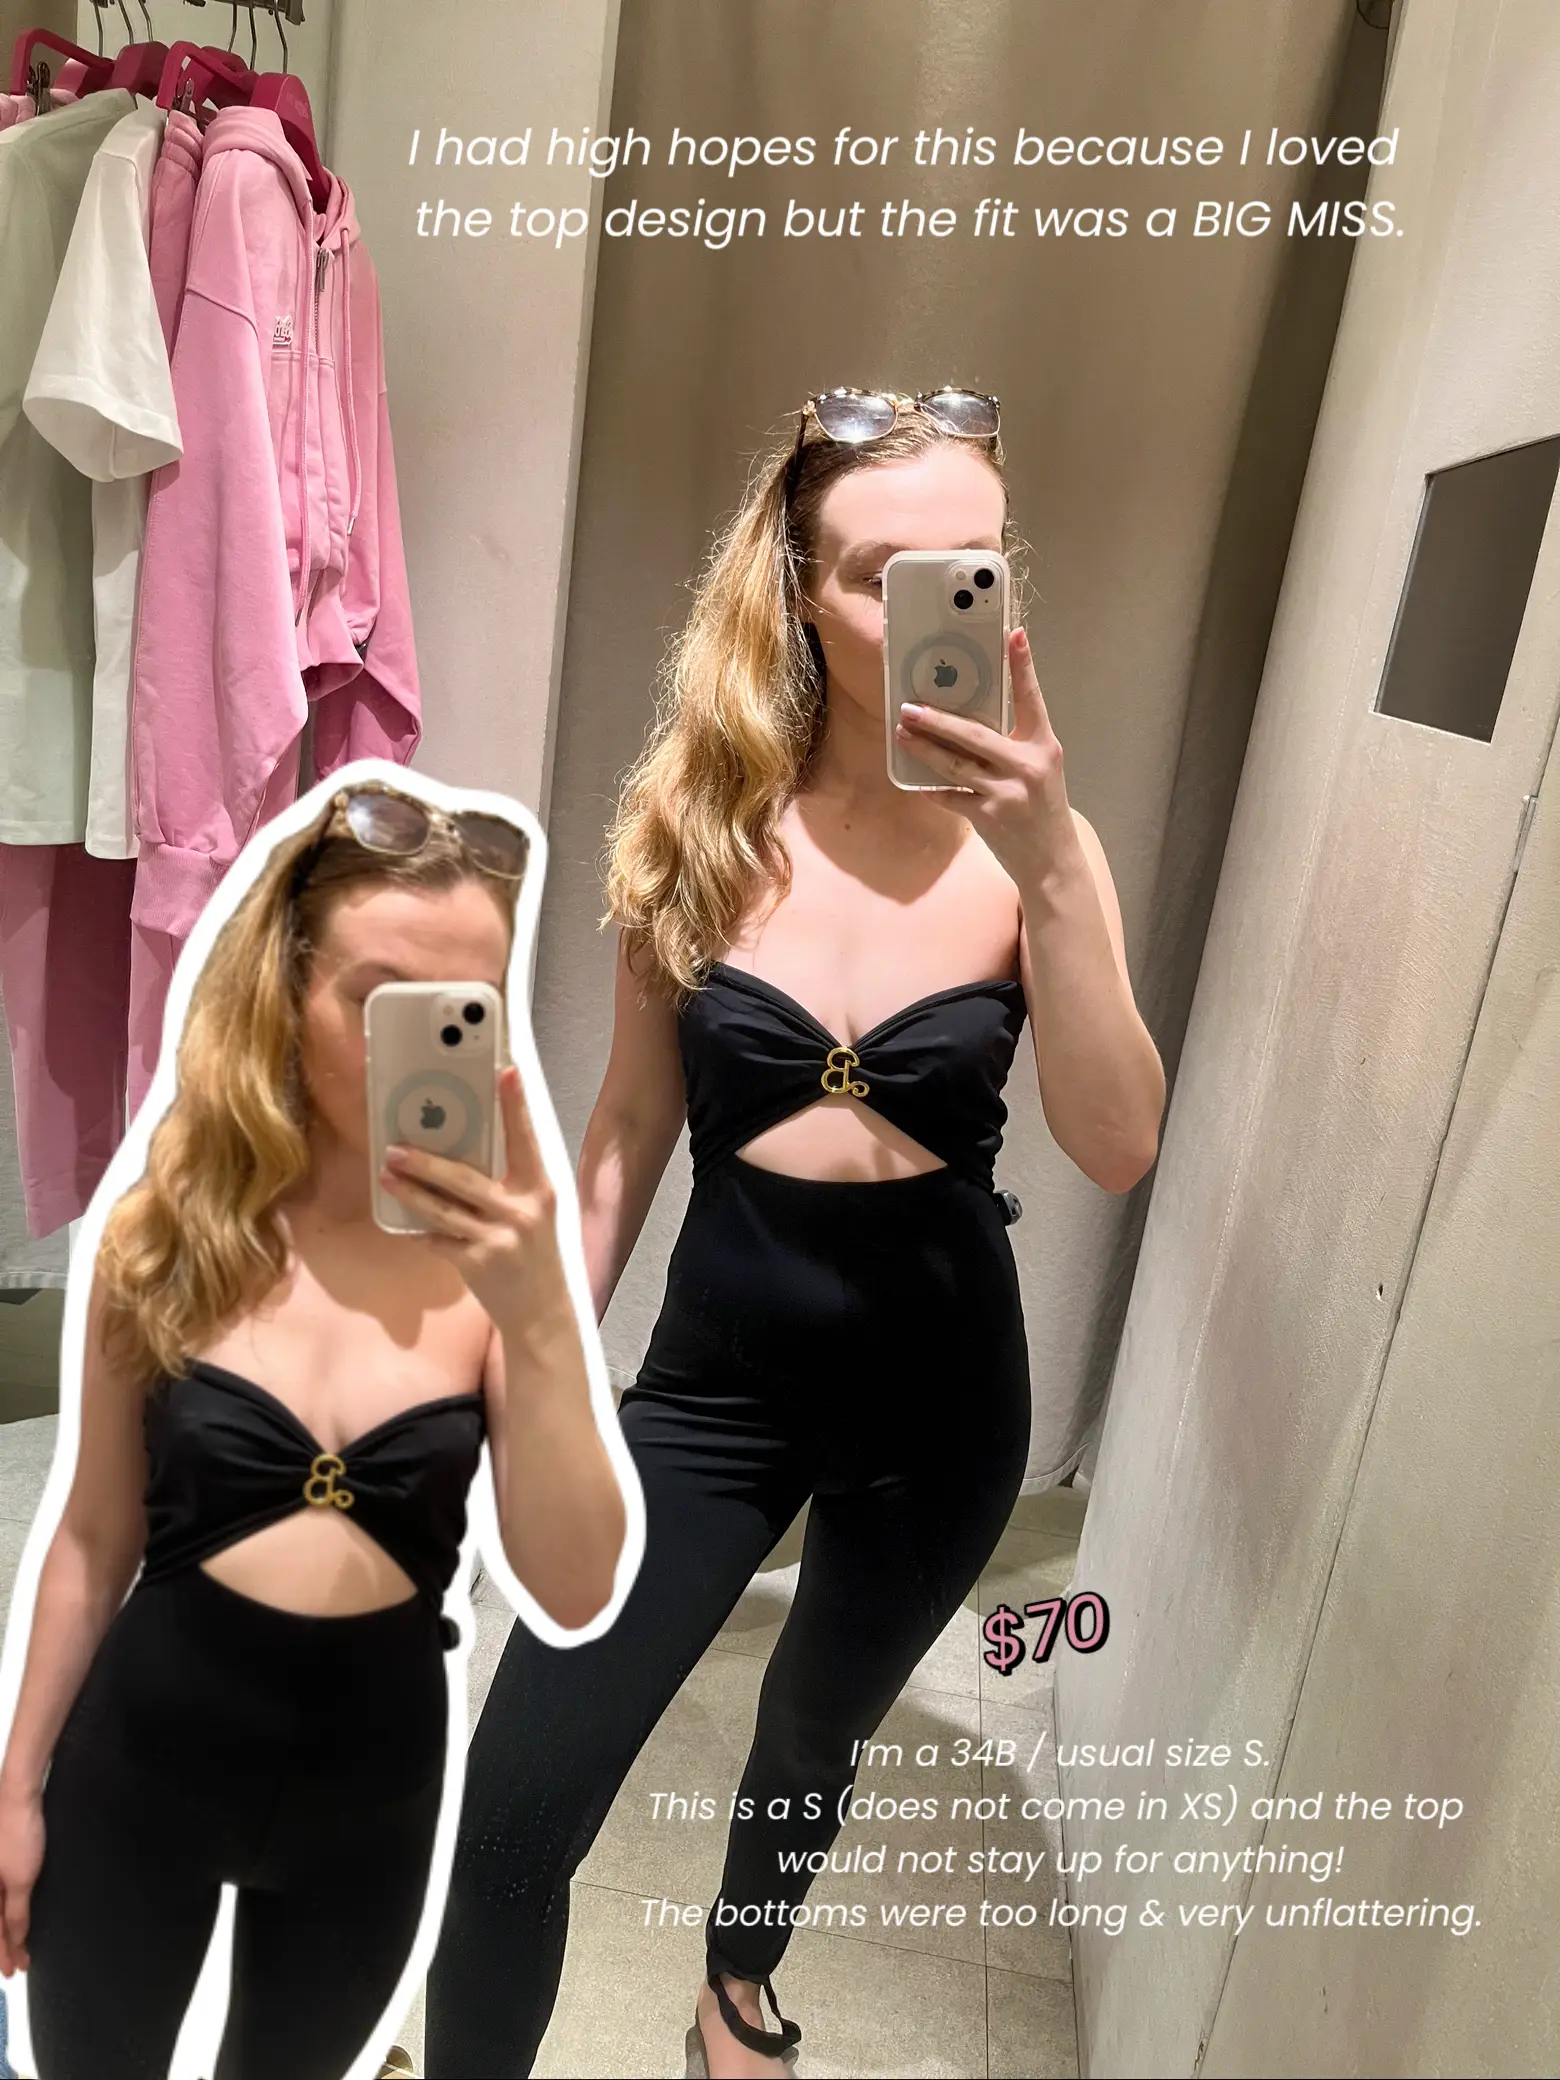 9 Girls Try on 34B Bras and Prove That Bra Sizes Are B.S.